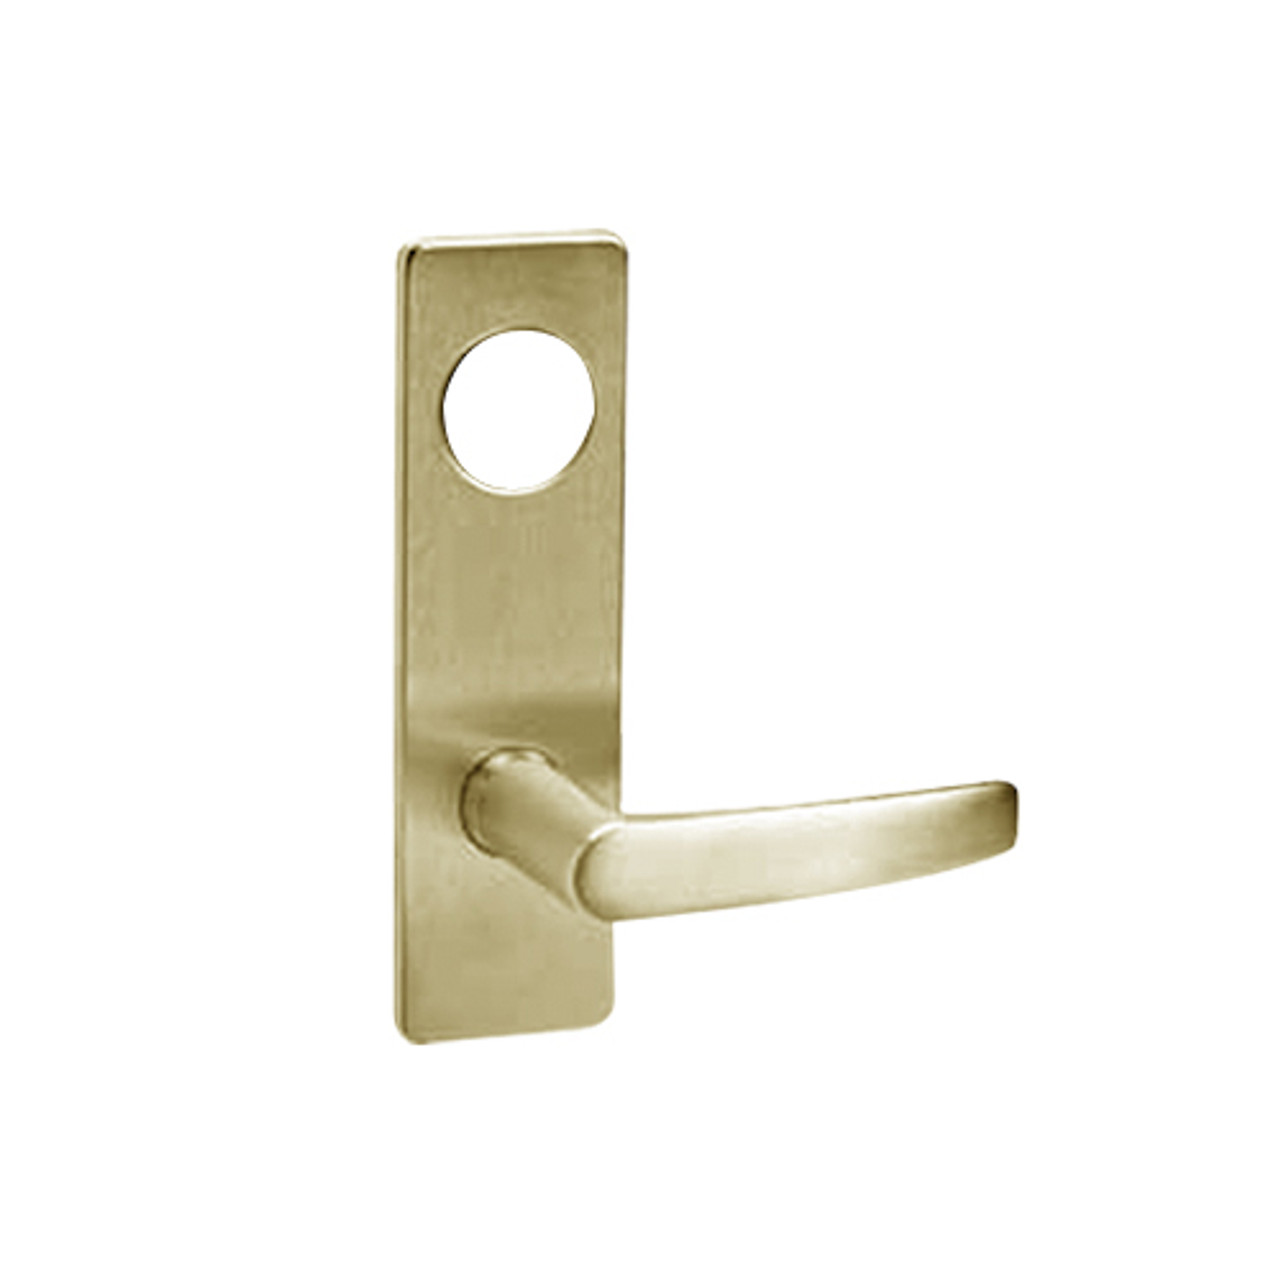 ML2069-ASP-606 Corbin Russwin ML2000 Series Mortise Institution Privacy Locksets with Armstrong Lever in Satin Brass